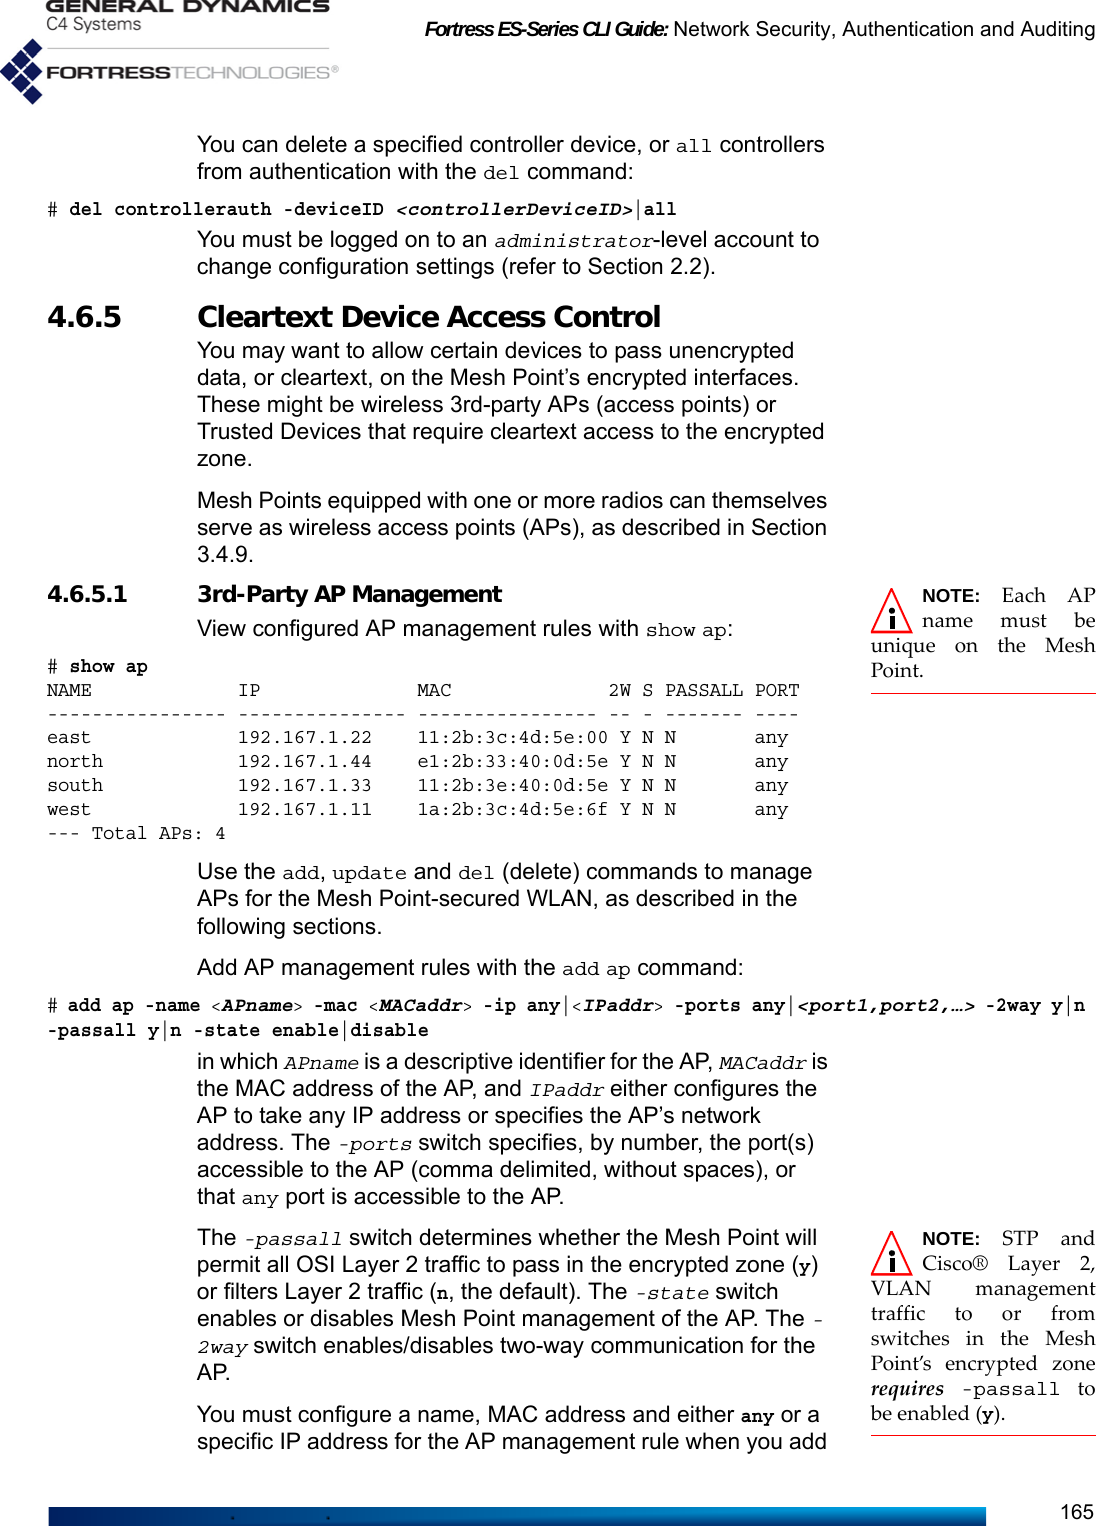 Fortress ES-Series CLI Guide: Network Security, Authentication and Auditing165You can delete a specified controller device, or all controllers from authentication with the del command:# del controllerauth -deviceID &lt;controllerDeviceID&gt;|allYou must be logged on to an administrator-level account to change configuration settings (refer to Section 2.2).4.6.5 Cleartext Device Access Control You may want to allow certain devices to pass unencrypted data, or cleartext, on the Mesh Point’s encrypted interfaces. These might be wireless 3rd-party APs (access points) or Trusted Devices that require cleartext access to the encrypted zone.Mesh Points equipped with one or more radios can themselves serve as wireless access points (APs), as described in Section 3.4.9. NOTE: Each APname must beunique on the MeshPoint.4.6.5.1 3rd-Party AP Management View configured AP management rules with show ap:# show apNAME             IP              MAC              2W S PASSALL PORT---------------- --------------- ---------------- -- - ------- ----east             192.167.1.22    11:2b:3c:4d:5e:00 Y N N       anynorth            192.167.1.44    e1:2b:33:40:0d:5e Y N N       anysouth            192.167.1.33    11:2b:3e:40:0d:5e Y N N       anywest             192.167.1.11    1a:2b:3c:4d:5e:6f Y N N       any--- Total APs: 4Use the add, update and del (delete) commands to manage APs for the Mesh Point-secured WLAN, as described in the following sections.Add AP management rules with the add ap command:# add ap -name &lt;APname&gt; -mac &lt;MACaddr&gt; -ip any|&lt;IPaddr&gt; -ports any|&lt;port1,port2,…&gt; -2way y|n -passall y|n -state enable|disablein which APname is a descriptive identifier for the AP, MACaddr is the MAC address of the AP, and IPaddr either configures the AP to take any IP address or specifies the AP’s network address. The -ports switch specifies, by number, the port(s) accessible to the AP (comma delimited, without spaces), or that any port is accessible to the AP. NOTE: STP andCisco® Layer 2,VLAN managementtraffic to or fromswitches in the MeshPoint’s encrypted zonerequires -passall tobe enabled (y).The -passall switch determines whether the Mesh Point will permit all OSI Layer 2 traffic to pass in the encrypted zone (y) or filters Layer 2 traffic (n, the default). The -state switch enables or disables Mesh Point management of the AP. The -2way switch enables/disables two-way communication for the AP. You must configure a name, MAC address and either any or a specific IP address for the AP management rule when you add 